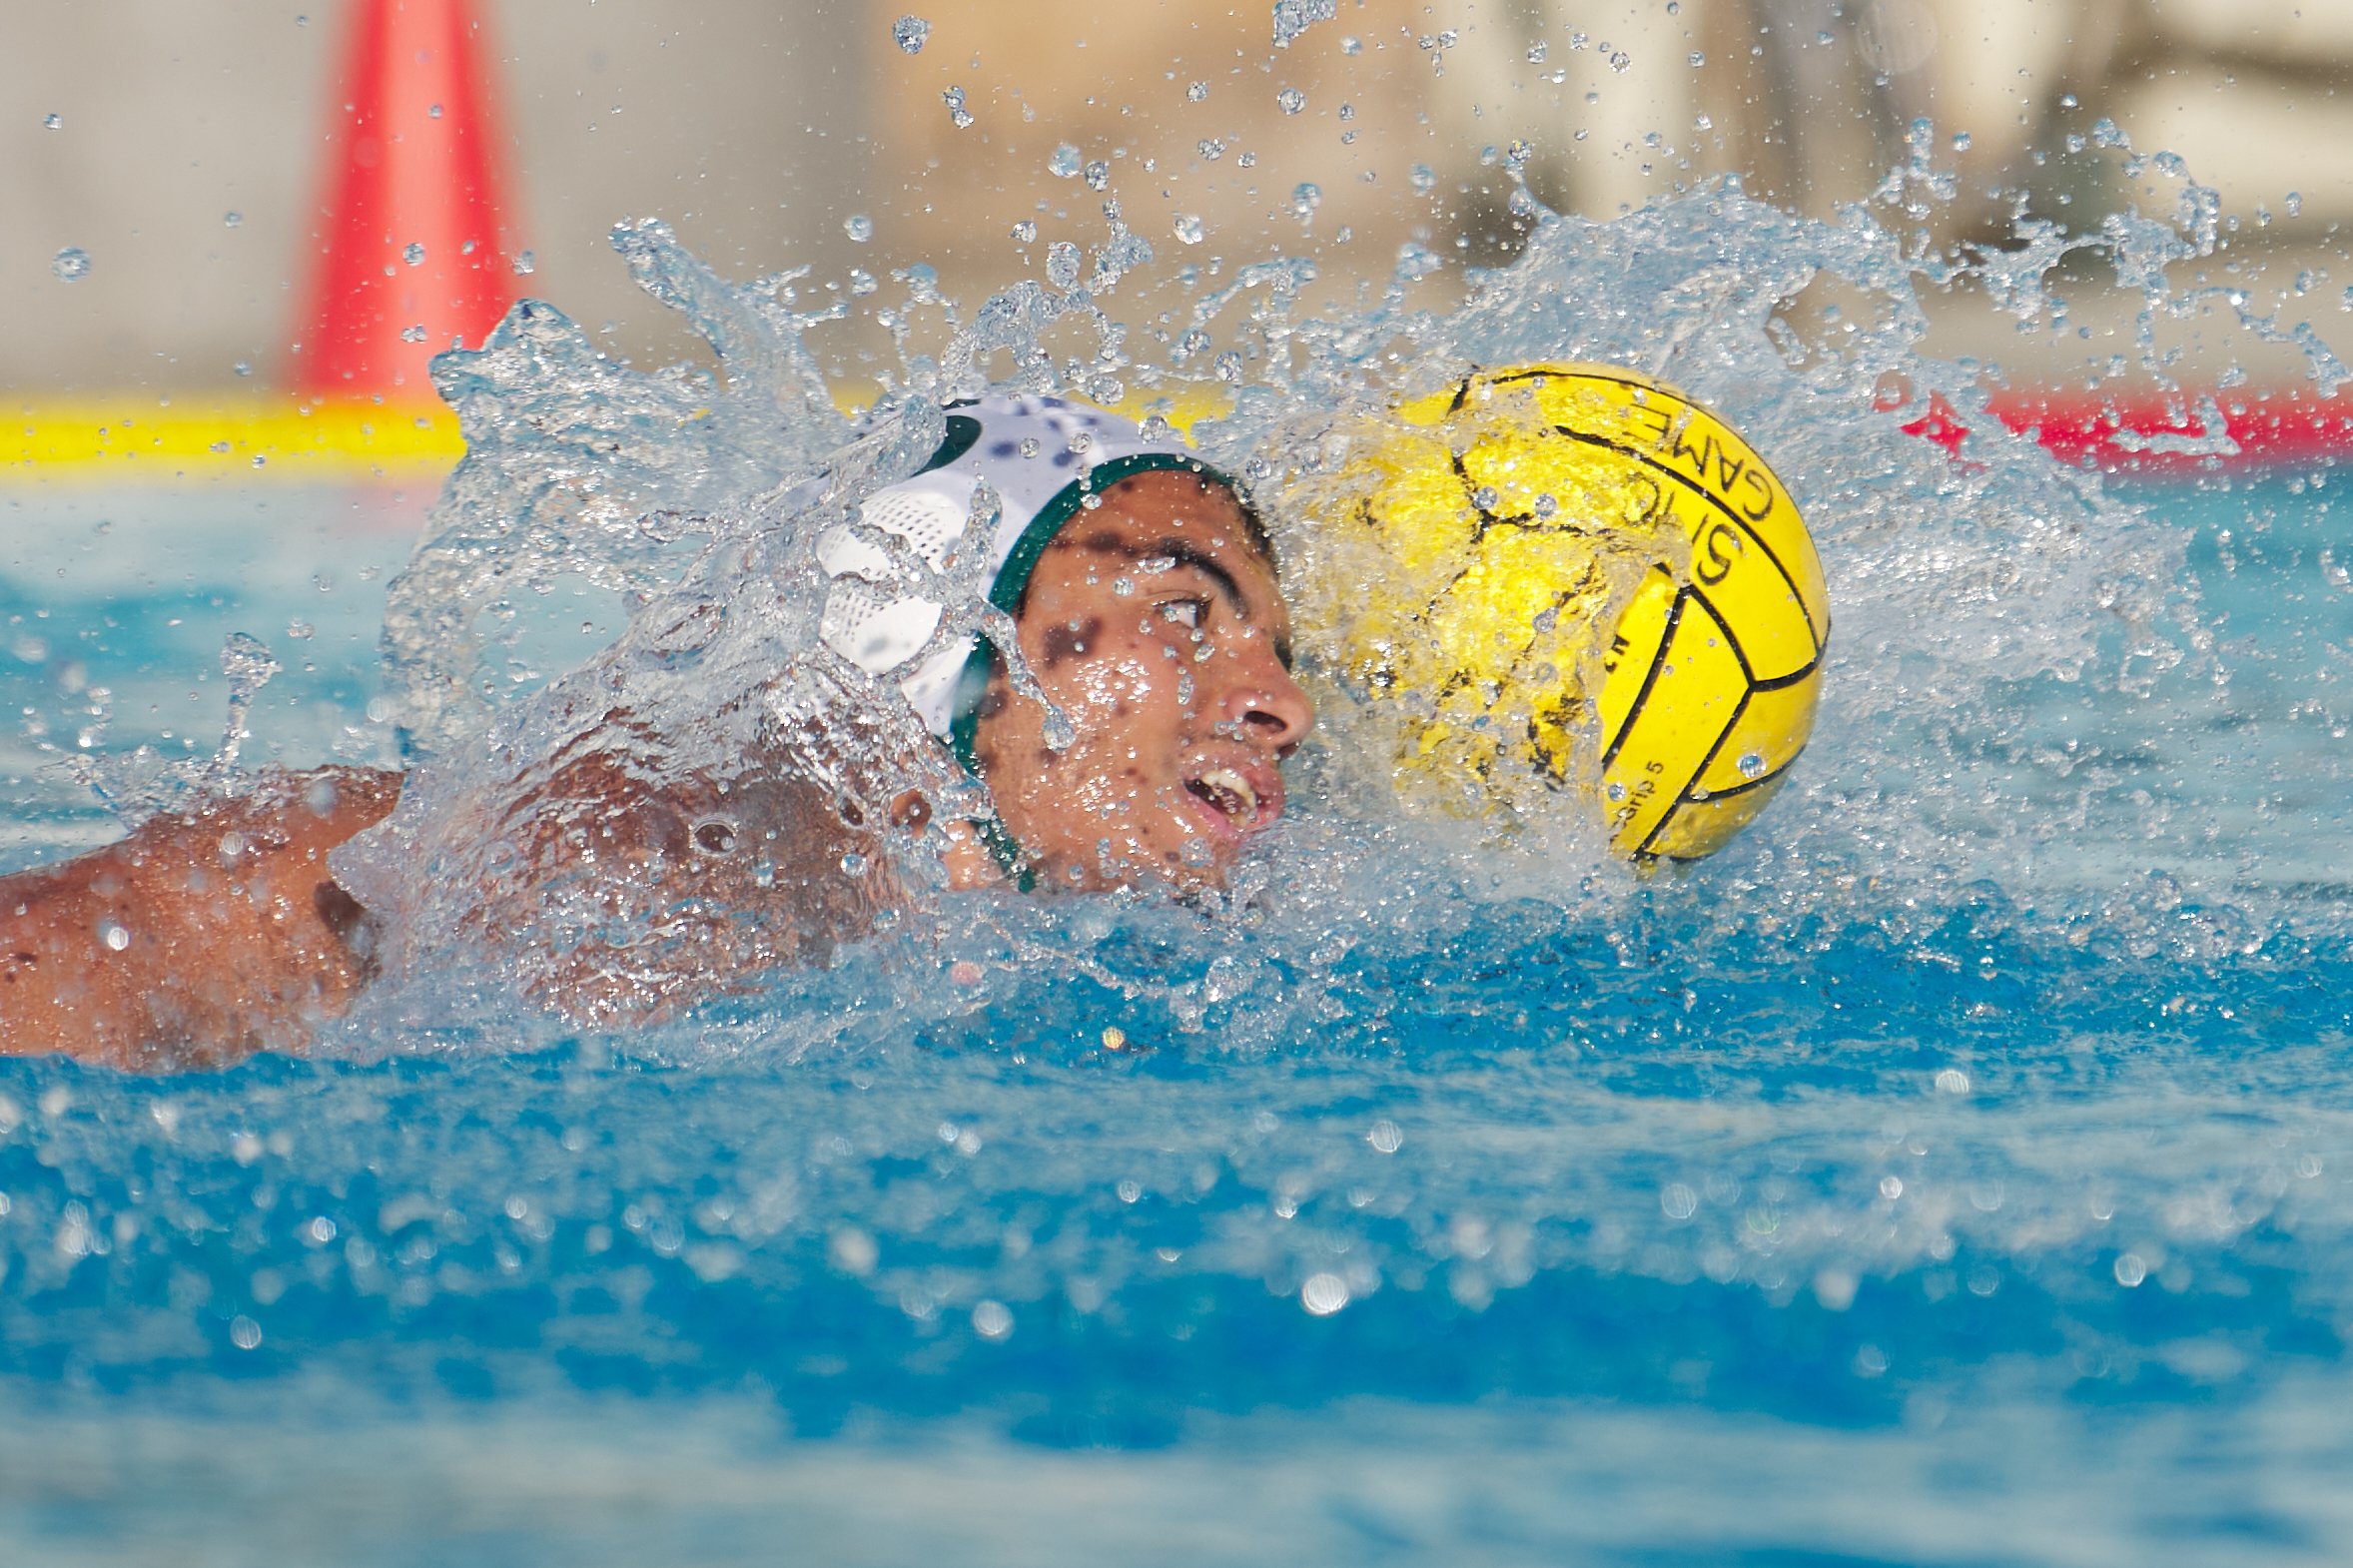  Los Angeles Valley College Monarchs' Arman Hunanyan during the men's water polo match against the Santa Monica College Corsairs on Wednesday, Sept. 28, 2022, at the SMC Aquatics Center in Santa Monica, Calif. The Corsairs lost 23-4. (Nicholas McCall